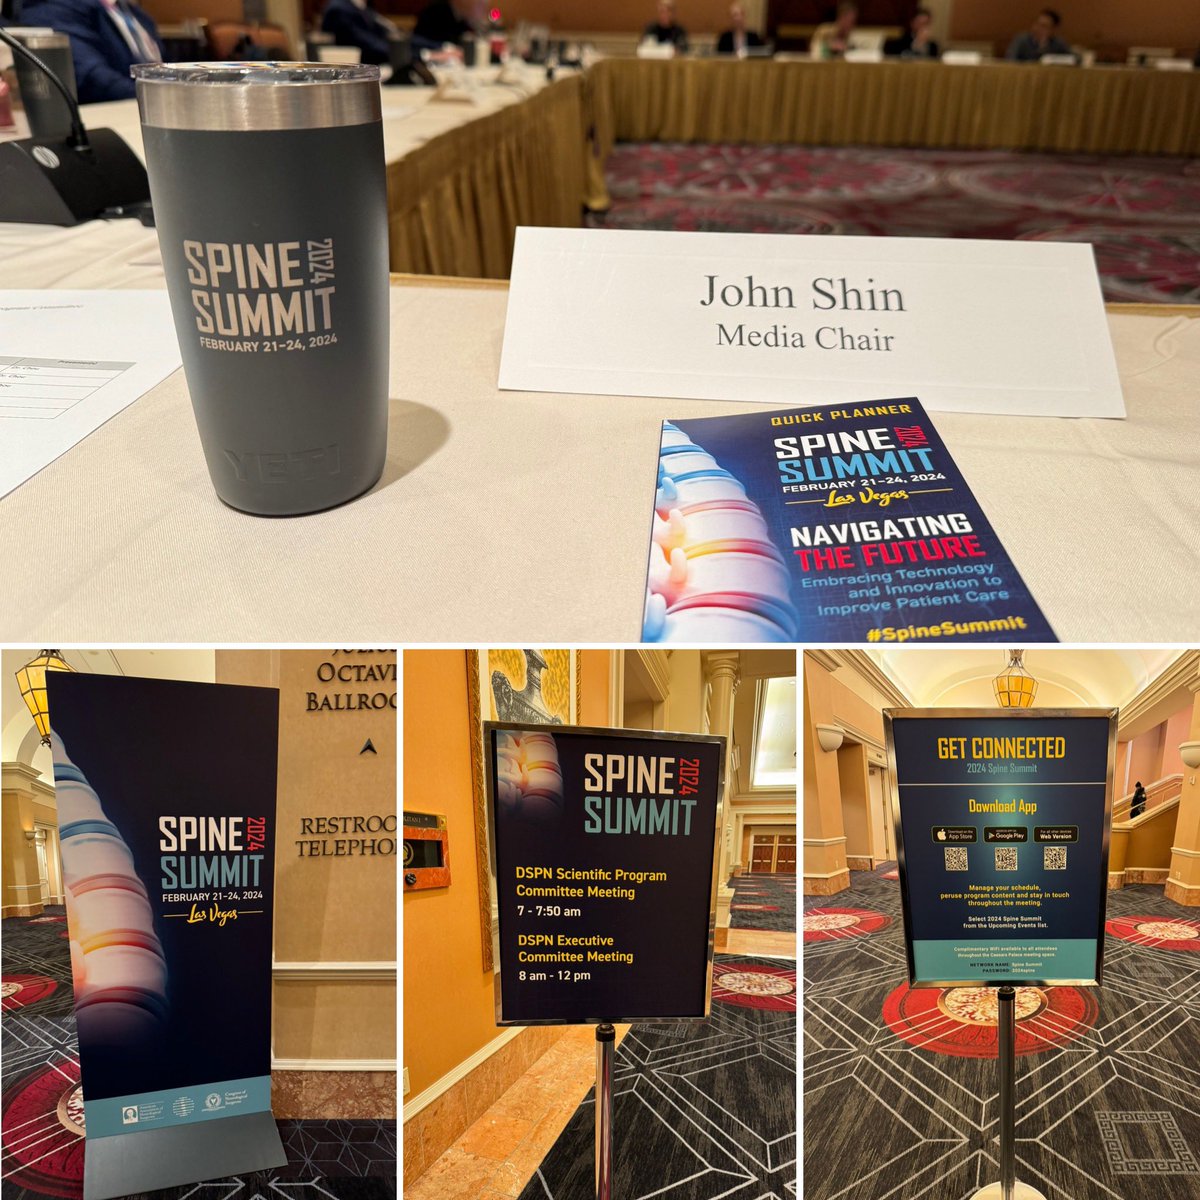 We are here in Vegas and underway at Spine Summit! This is my last meeting serving as media chair for the section. Please share all your meeting highlights, pictures with us, tag @spinesection. I’m passing the torch to @CheeragU who will elevate the team and section even further!